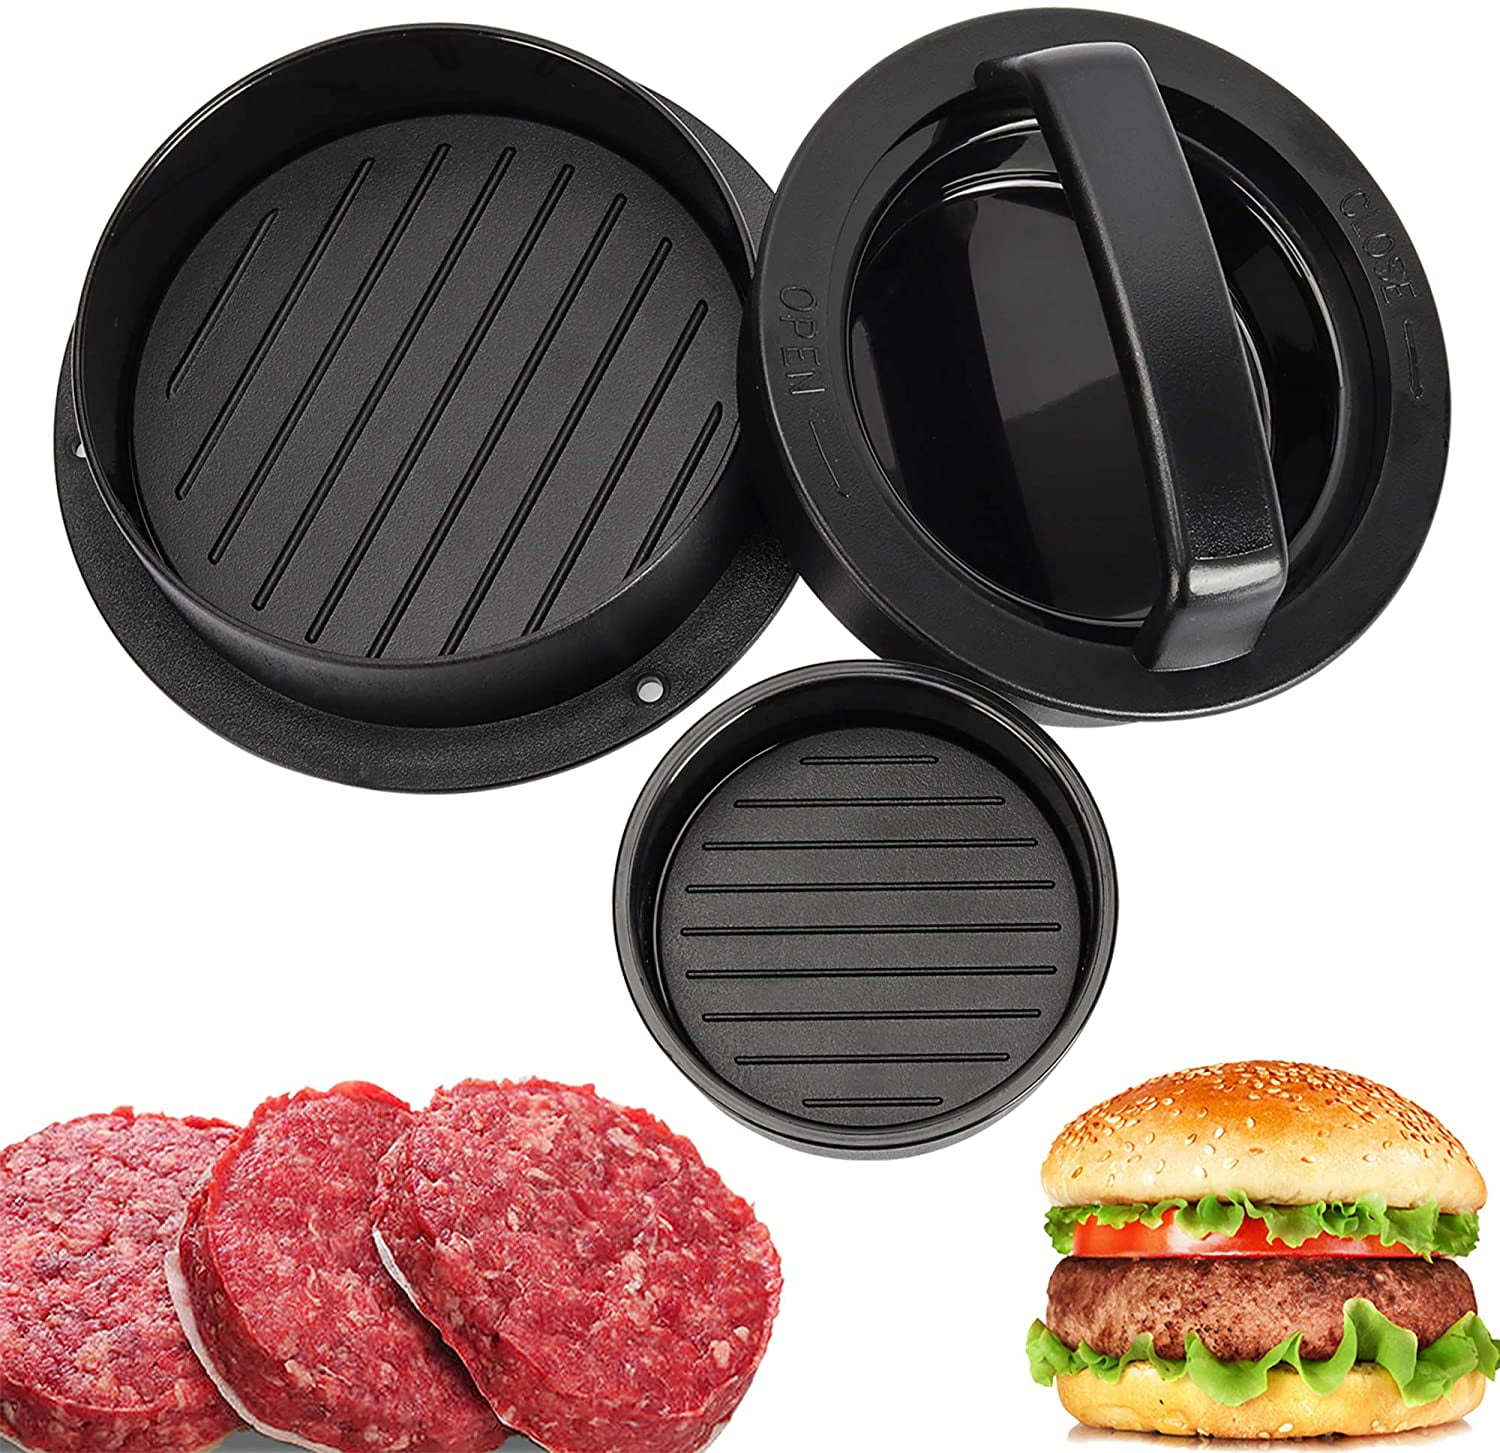 Bugucat Burger Press 50 Patty Papers Set Non-Stick Hamburger Press Patty Maker Mold with Wax Patty Paper Sheets Meat Beef Pork Lamb Cheese Halal Nut Veg Veggie Burger Maker for BBQ Barbecue Grill 